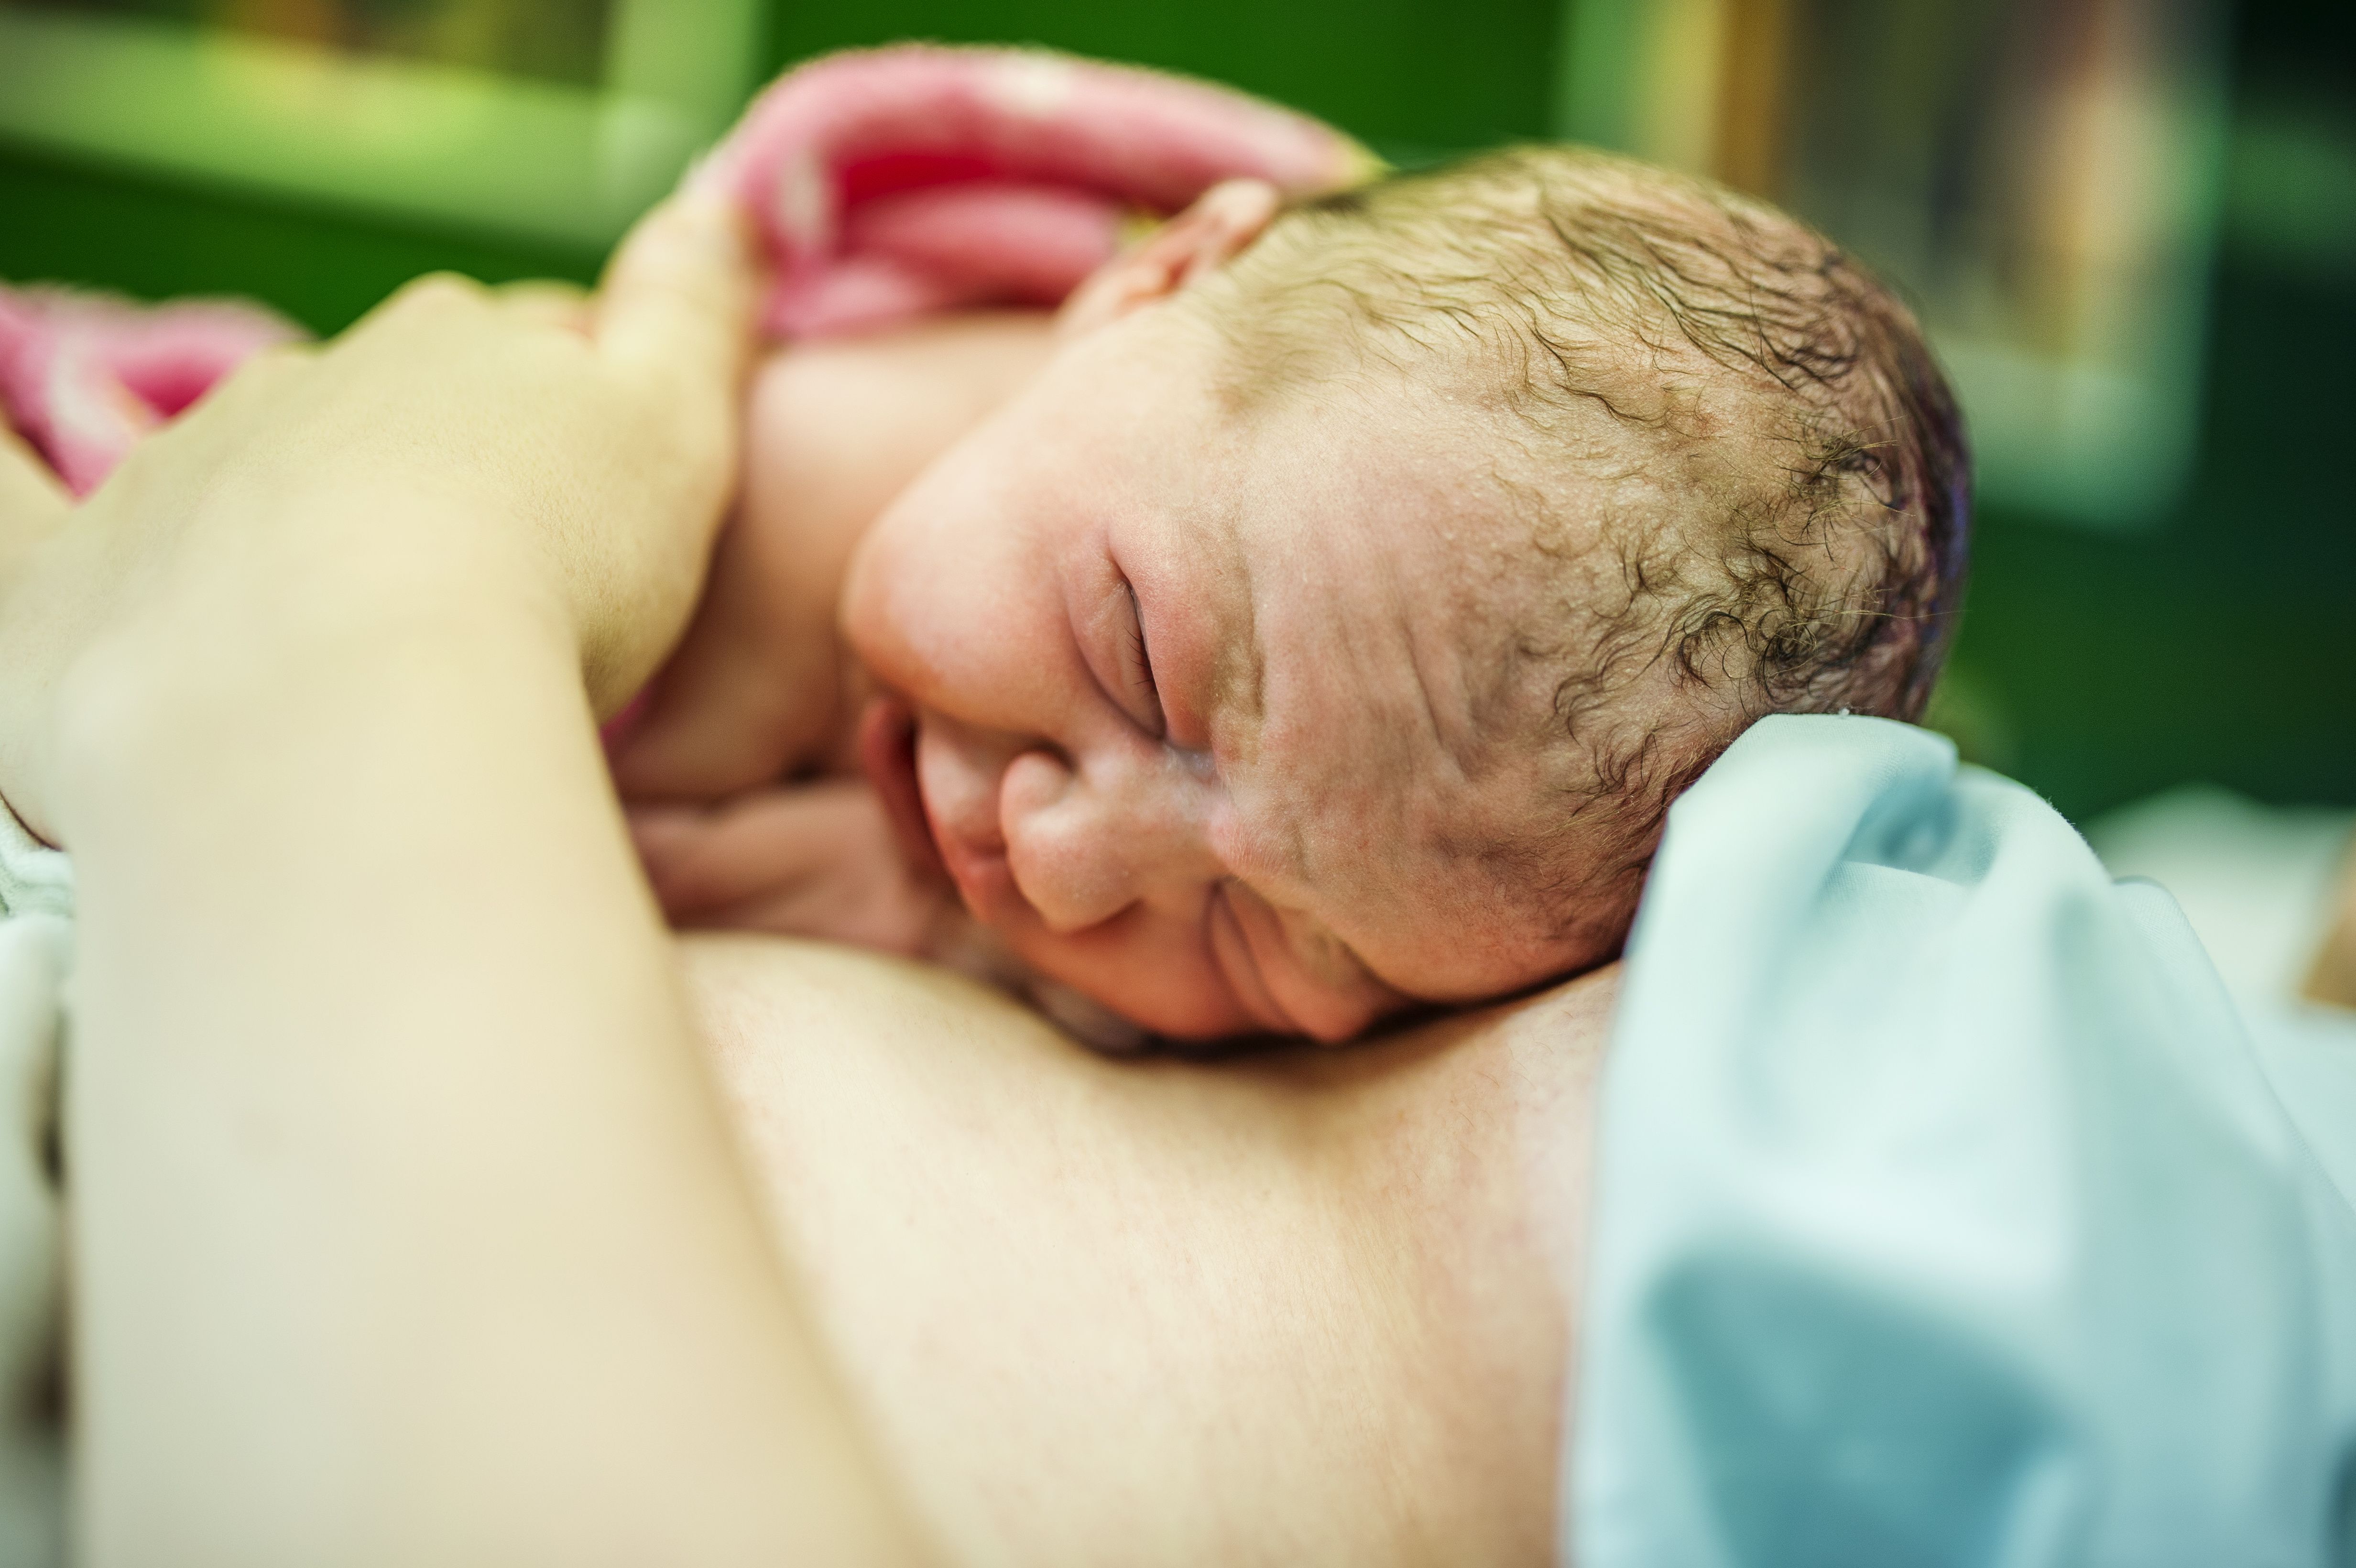 Skin-to-skin is a win-win for preemies and…